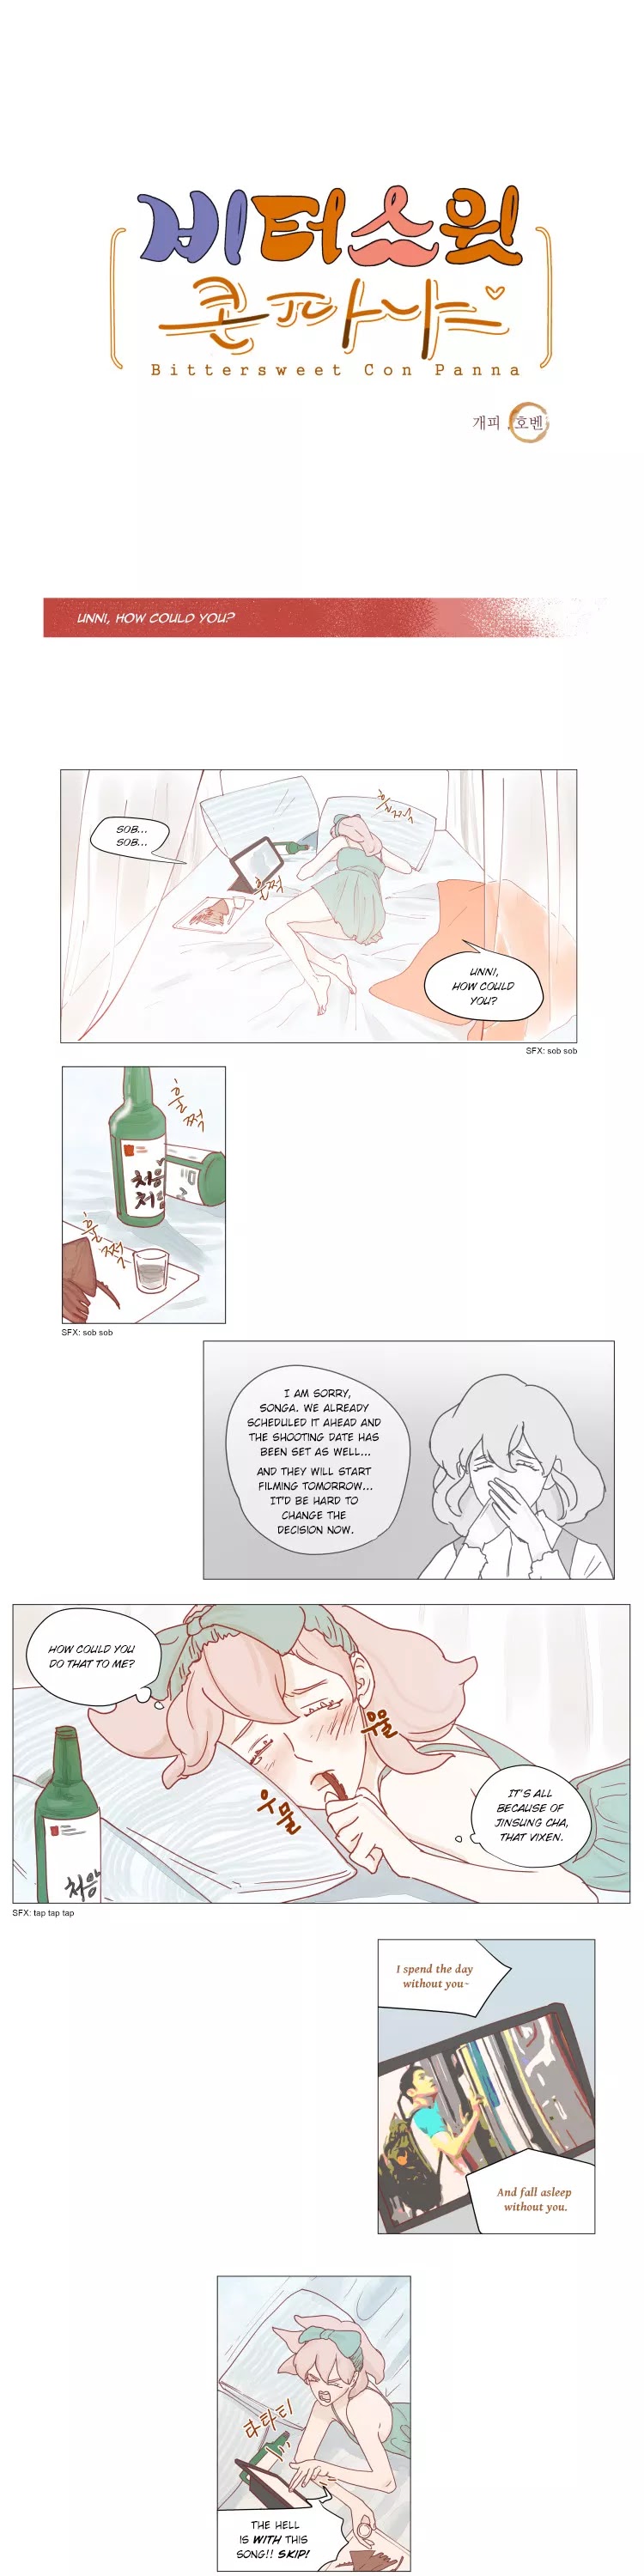 Bittersweet Con Panna - Page 2